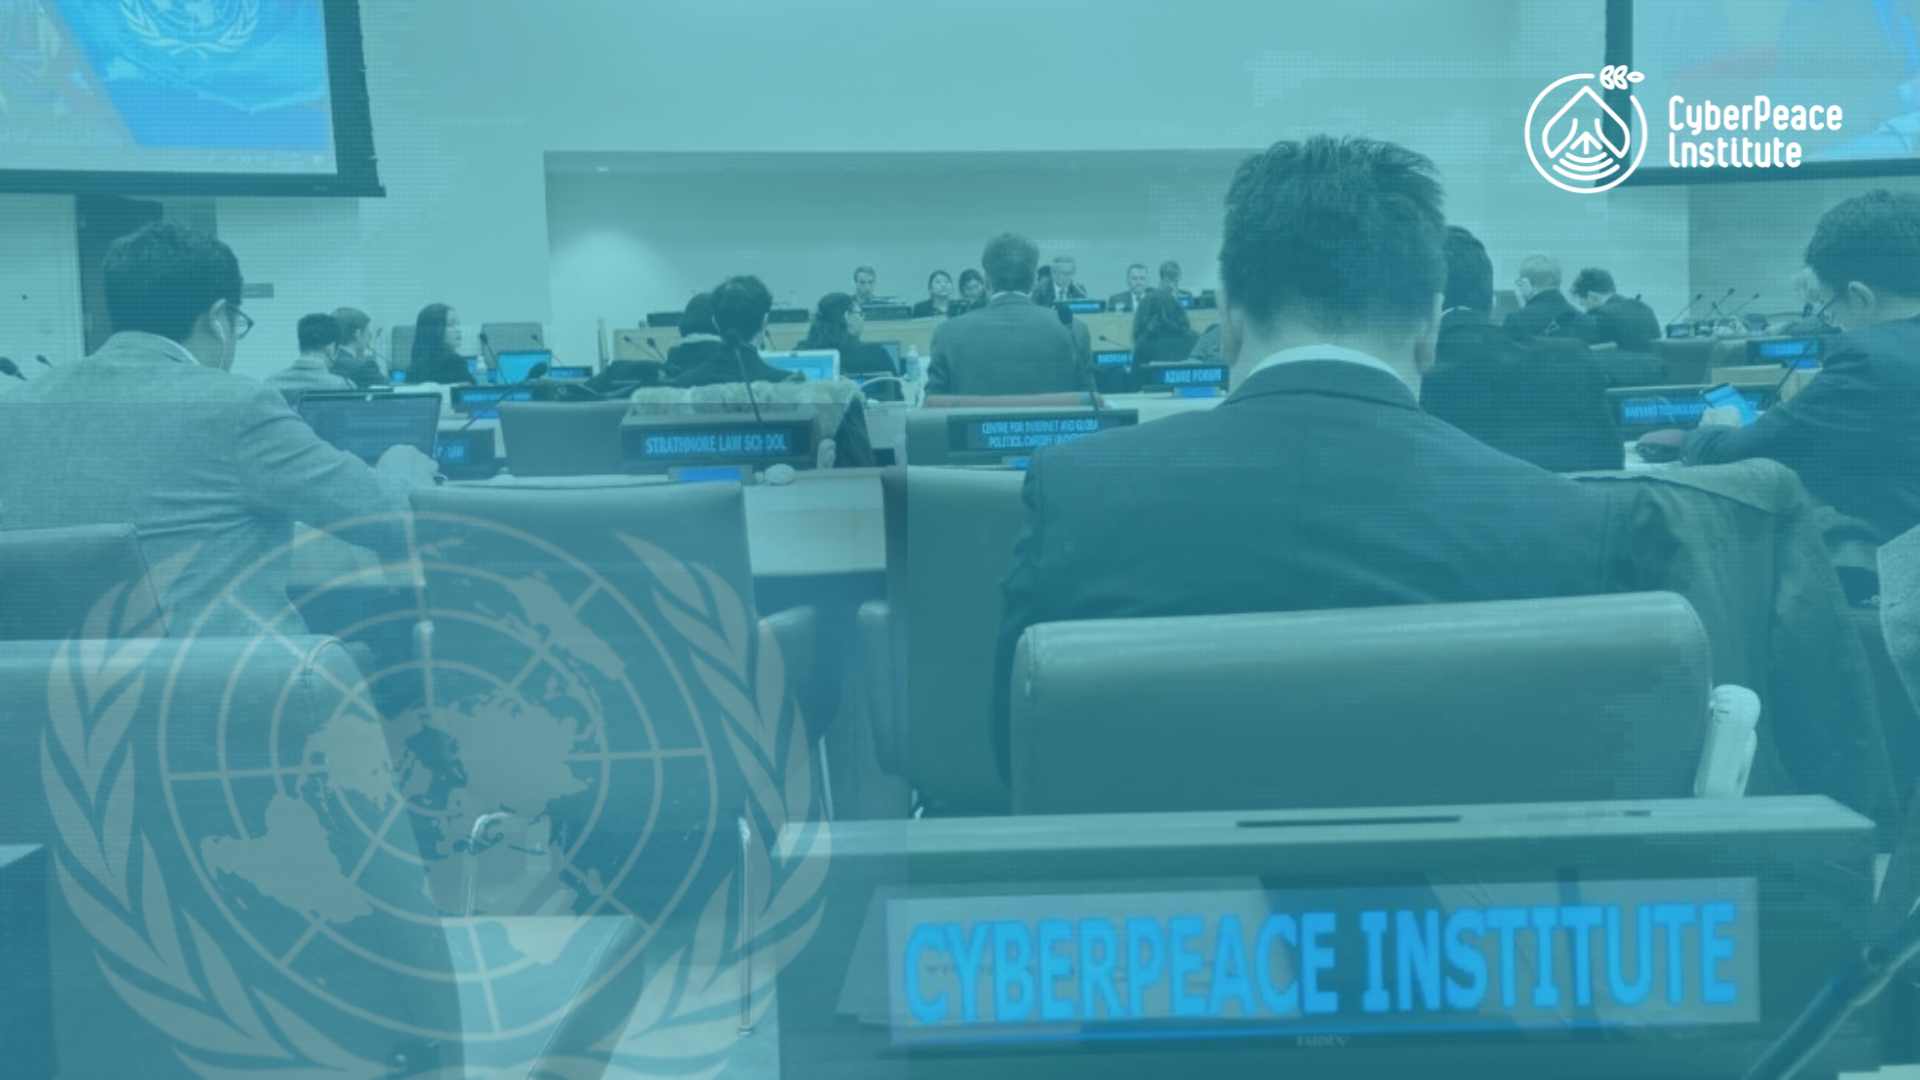 The CyberPeace Institute at the UN OEWG’s Multi-Stakeholder Meeting